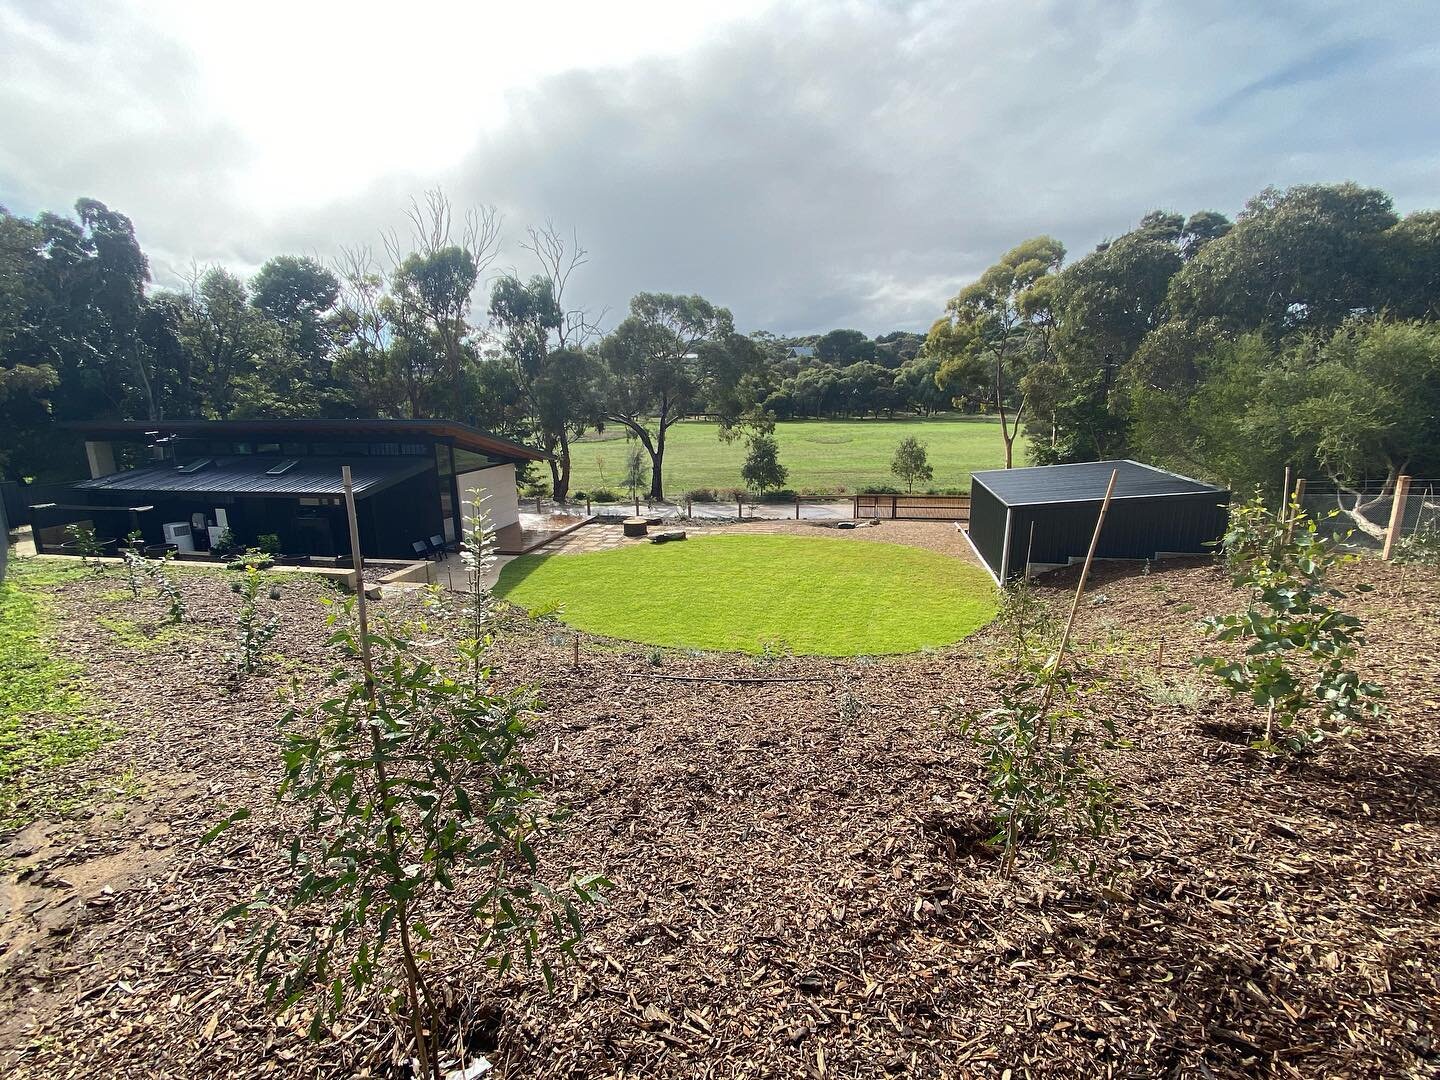 Views of Ukiyo&hellip; 🌳🍃🐇

This photo captures the property perfectly.  There is a large grassed area where guests can play p&eacute;tanque or Finska; a fire pit with wood and marshmallow roasting sticks; a large native garden; a citrus grove and